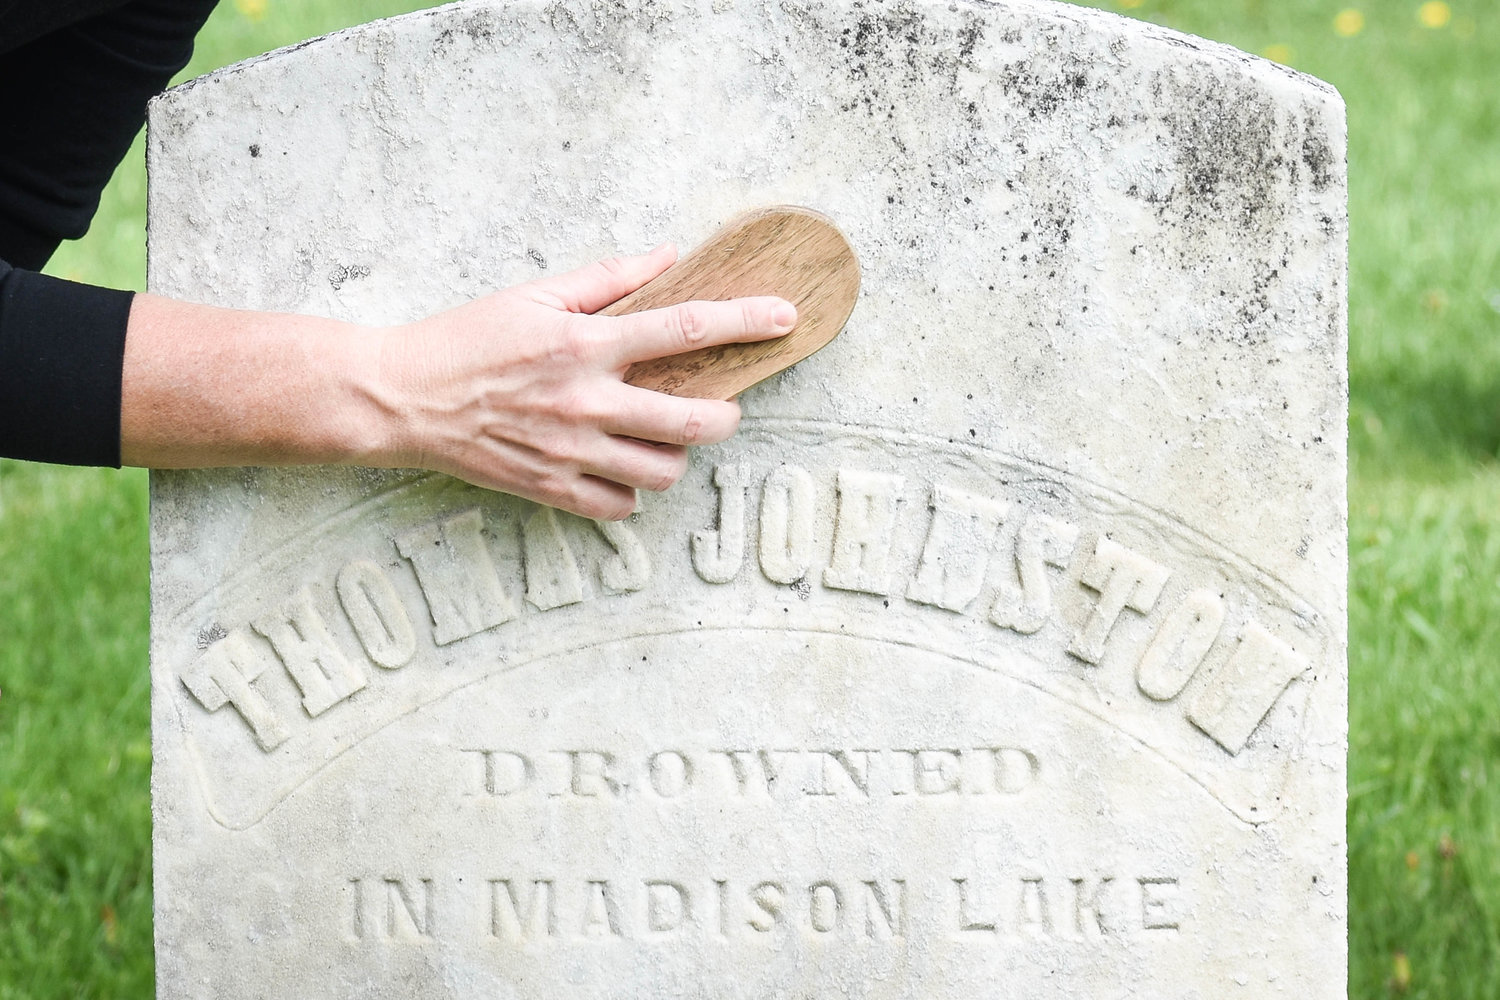 TikToker Megan Barnes brushes off a headstone she previously cleaned some time ago in Madison Village Cemetery. It takes weeks for the stone’s appearance to fully lighten to this degree after it has been cleaned with D/2 Biological Solution, Barnes explained. This is Thomas Johnston’s gravestone. Beneath it reads, “drowned in Madison Lake.”